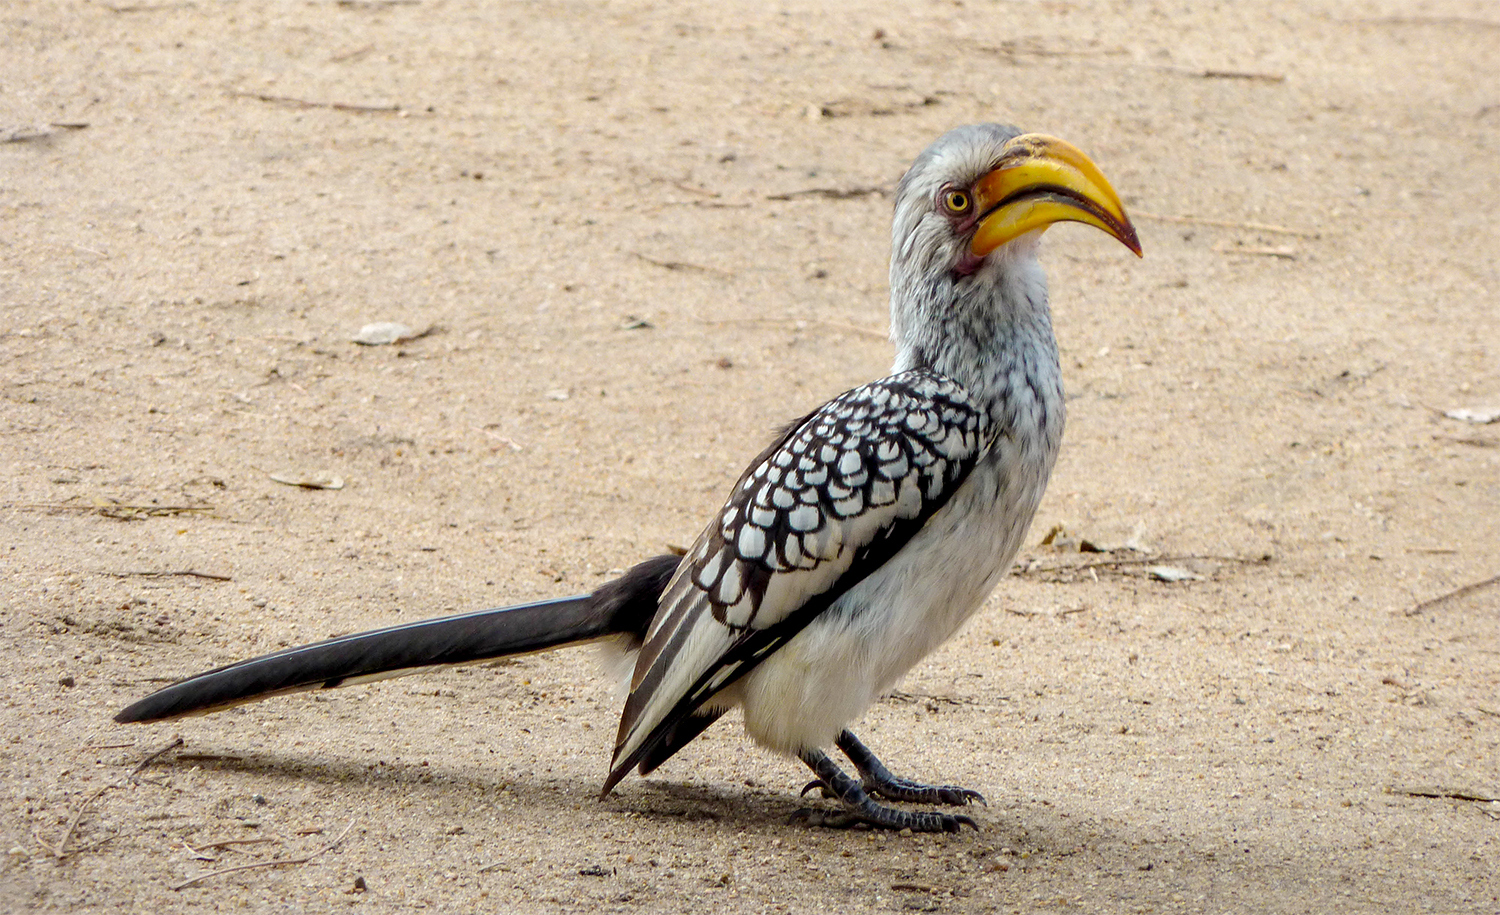 <p>Southern yellow-billed hornbills typically forage on the ground for food. This one's expression suggests the foraging wasn't so good that day.</p>